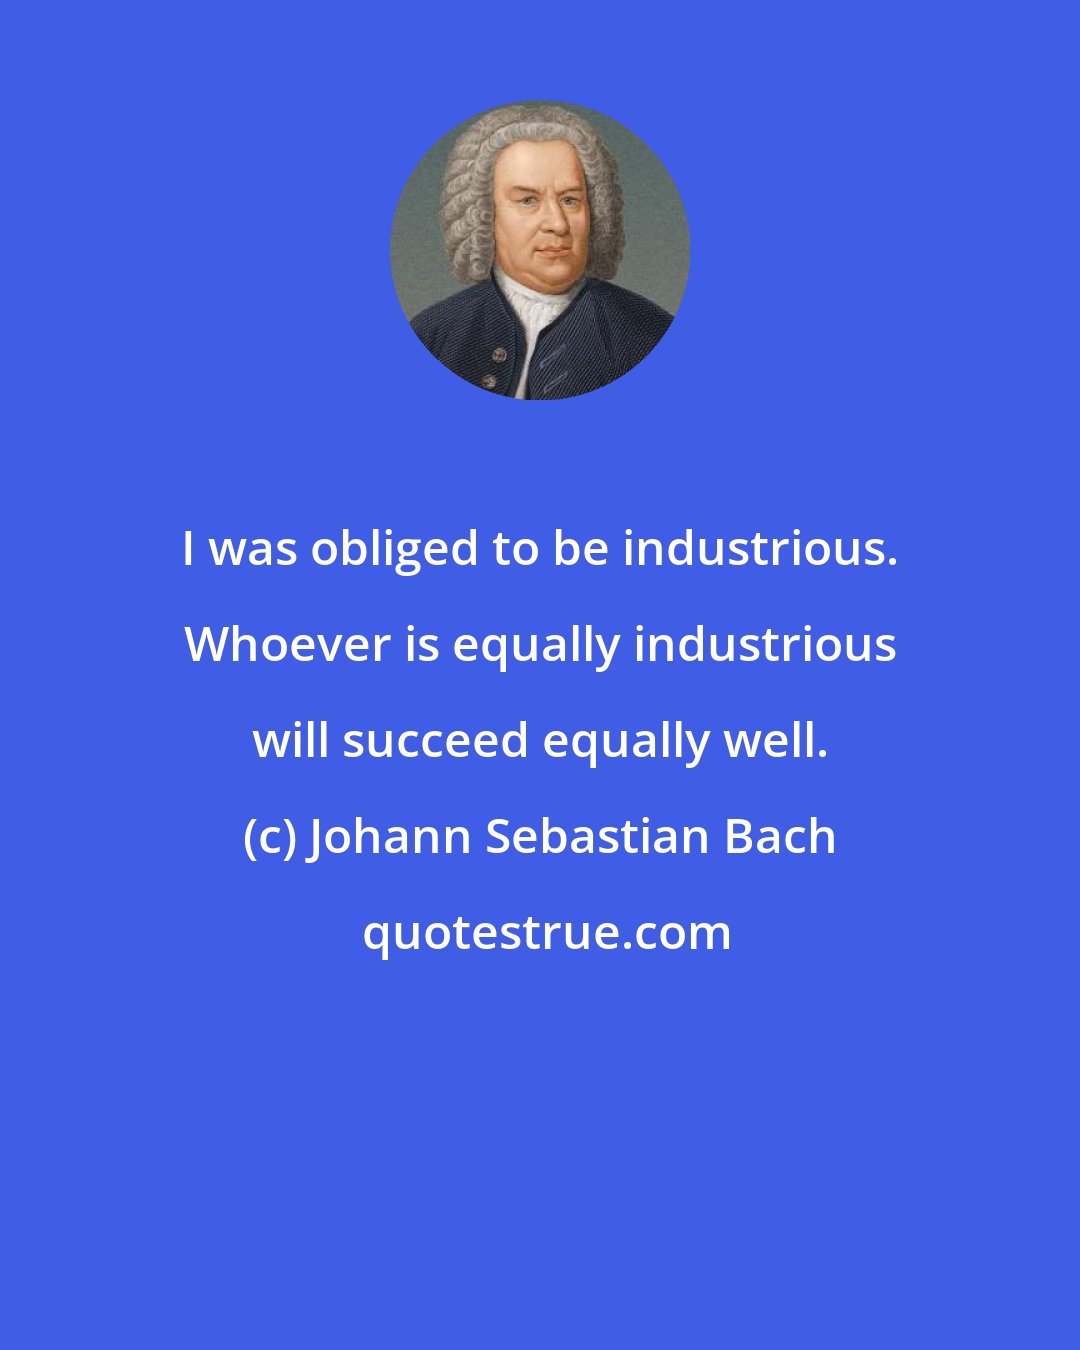 Johann Sebastian Bach: I was obliged to be industrious. Whoever is equally industrious will succeed equally well.